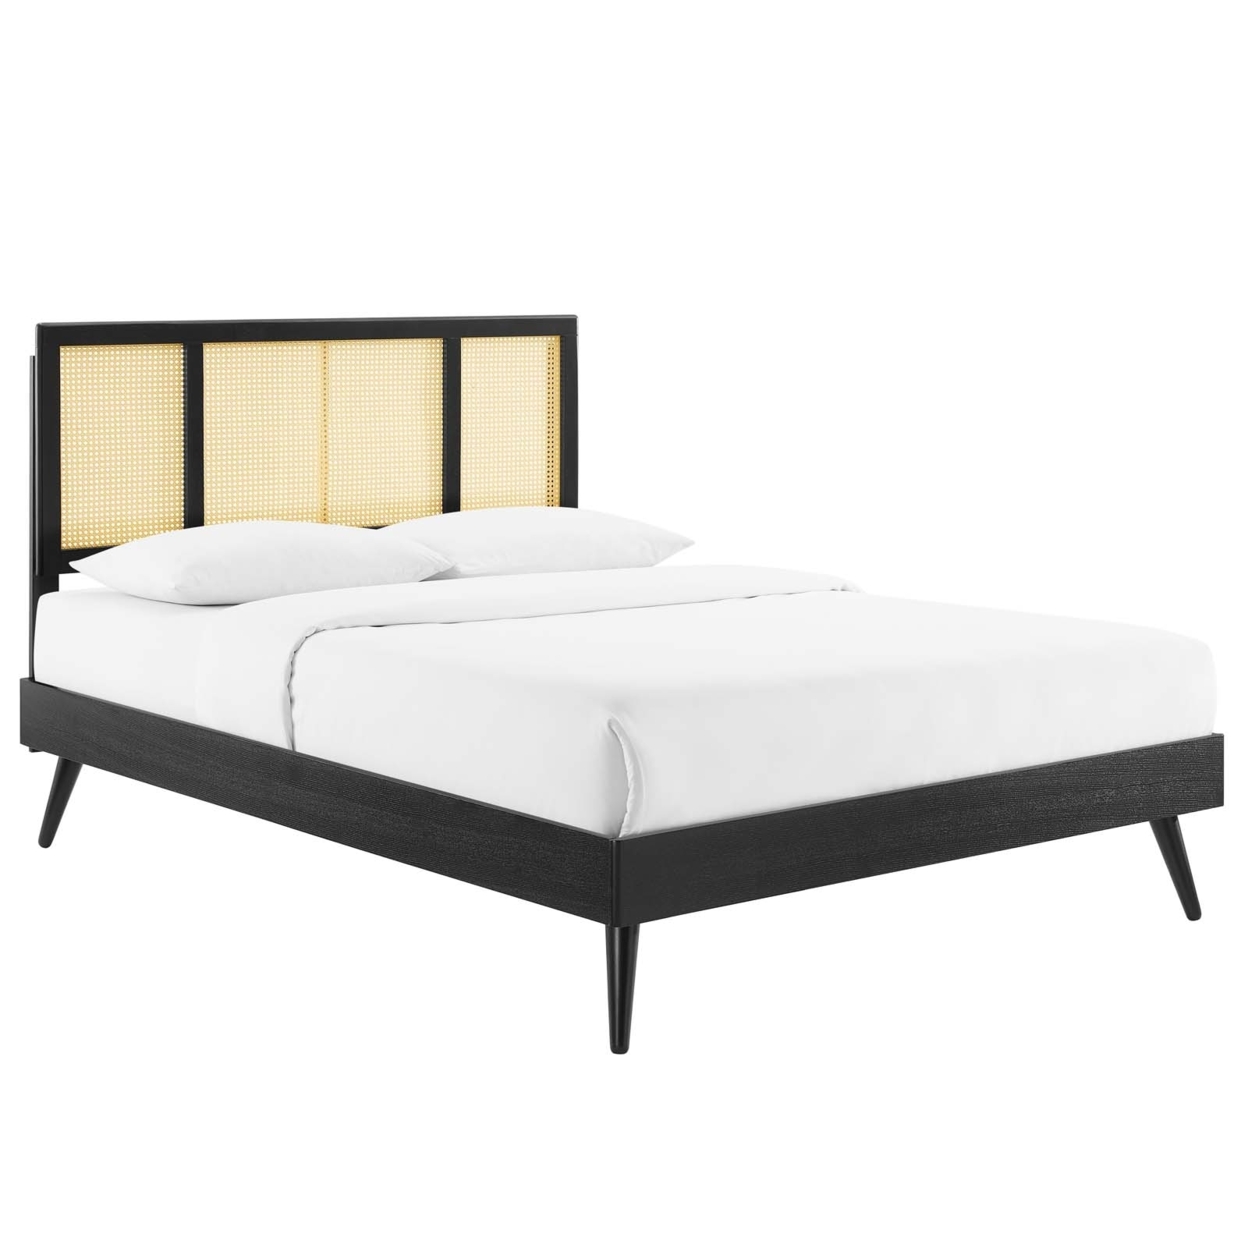 Kelsea Cane And Wood Full Platform Bed With Splayed Legs, Black